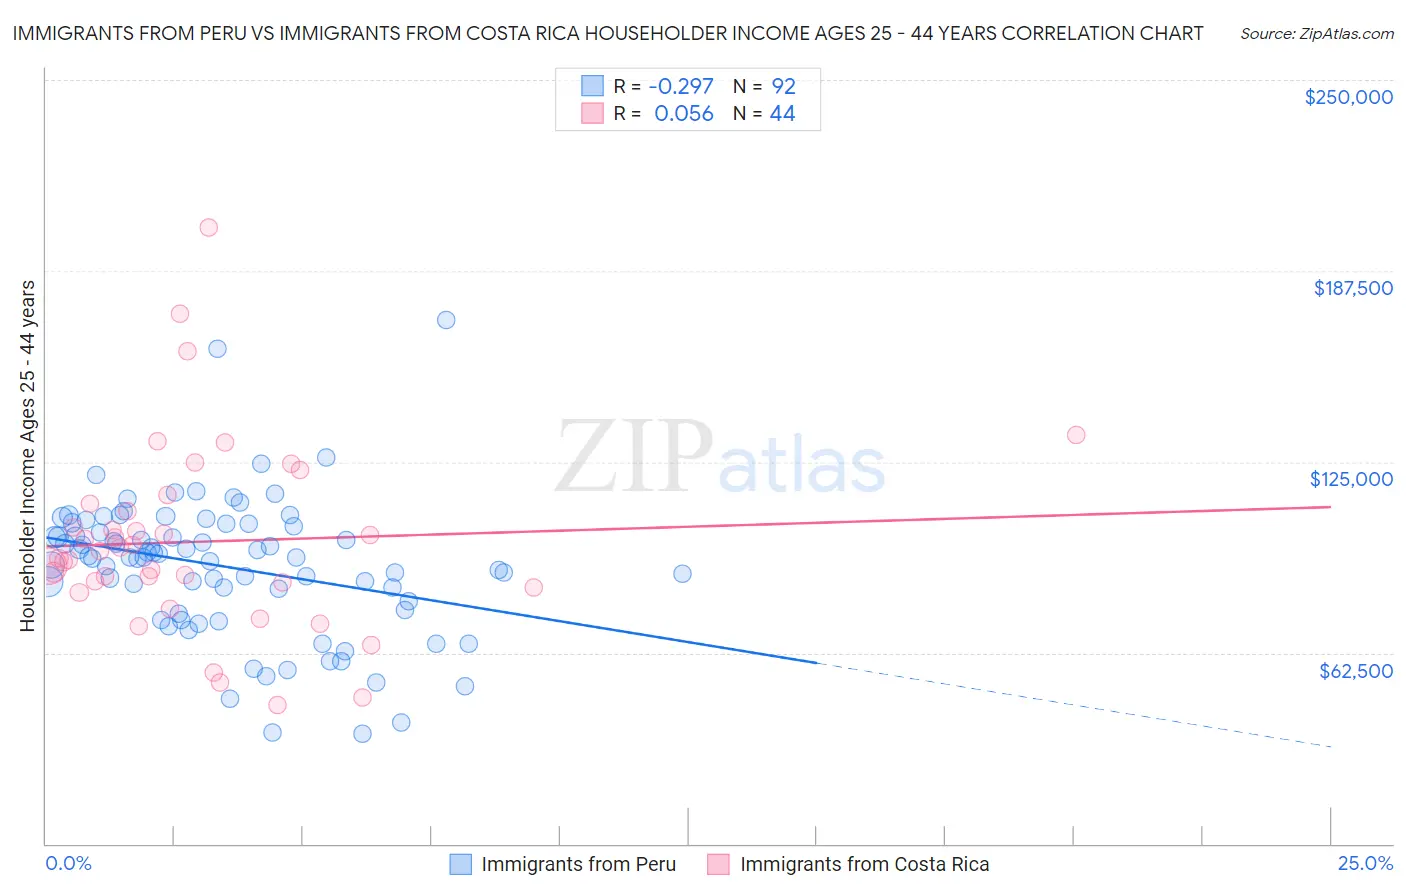 Immigrants from Peru vs Immigrants from Costa Rica Householder Income Ages 25 - 44 years